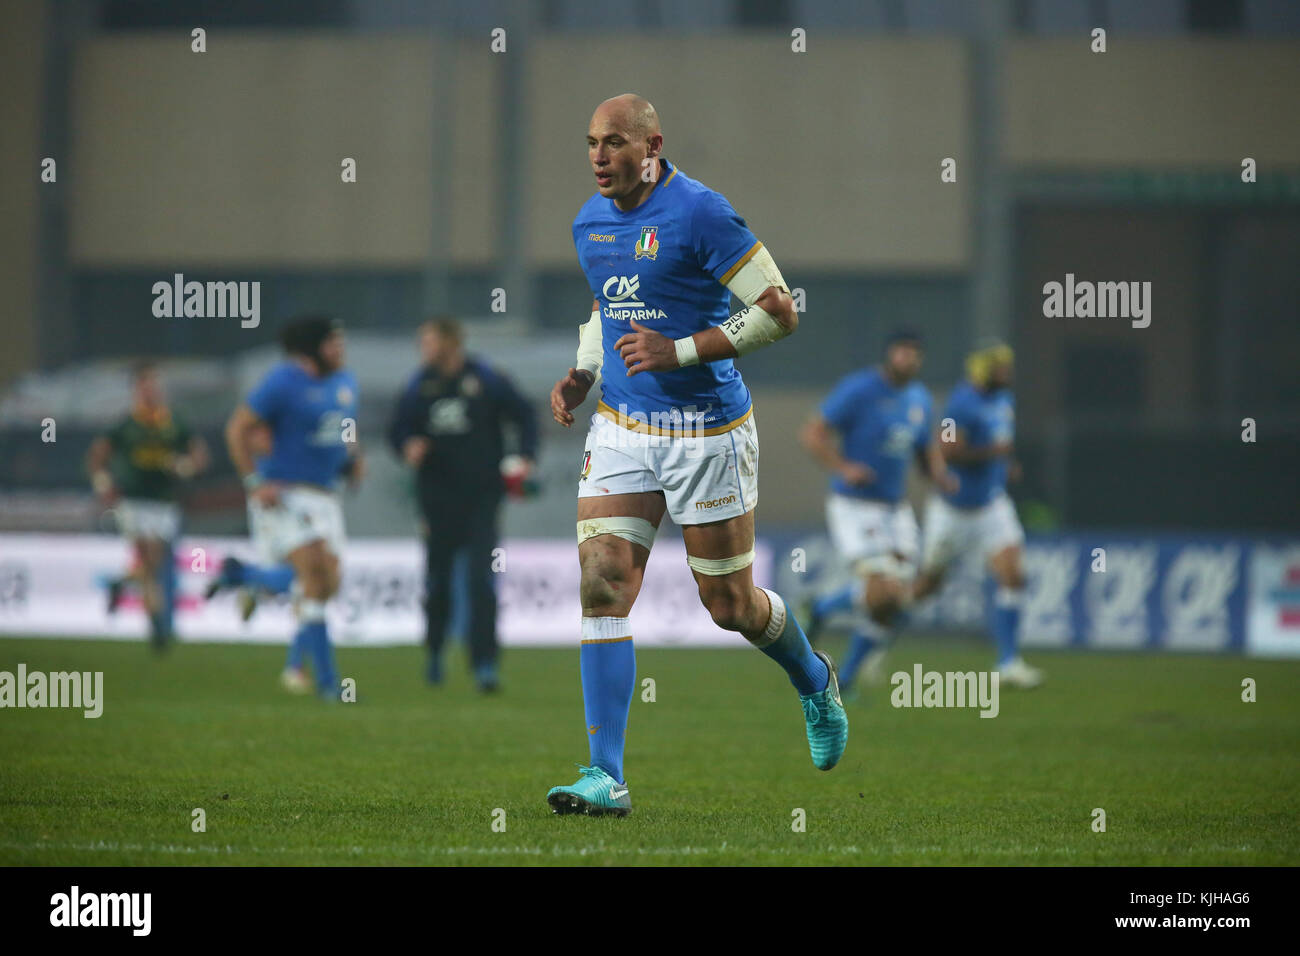 Padova, Italy. 25th November 2017. Italy's captain Sergio Parisse in the international november test match between Italy and South Africa. Massimiliano Carnabuci/Alamy Live News Stock Photo